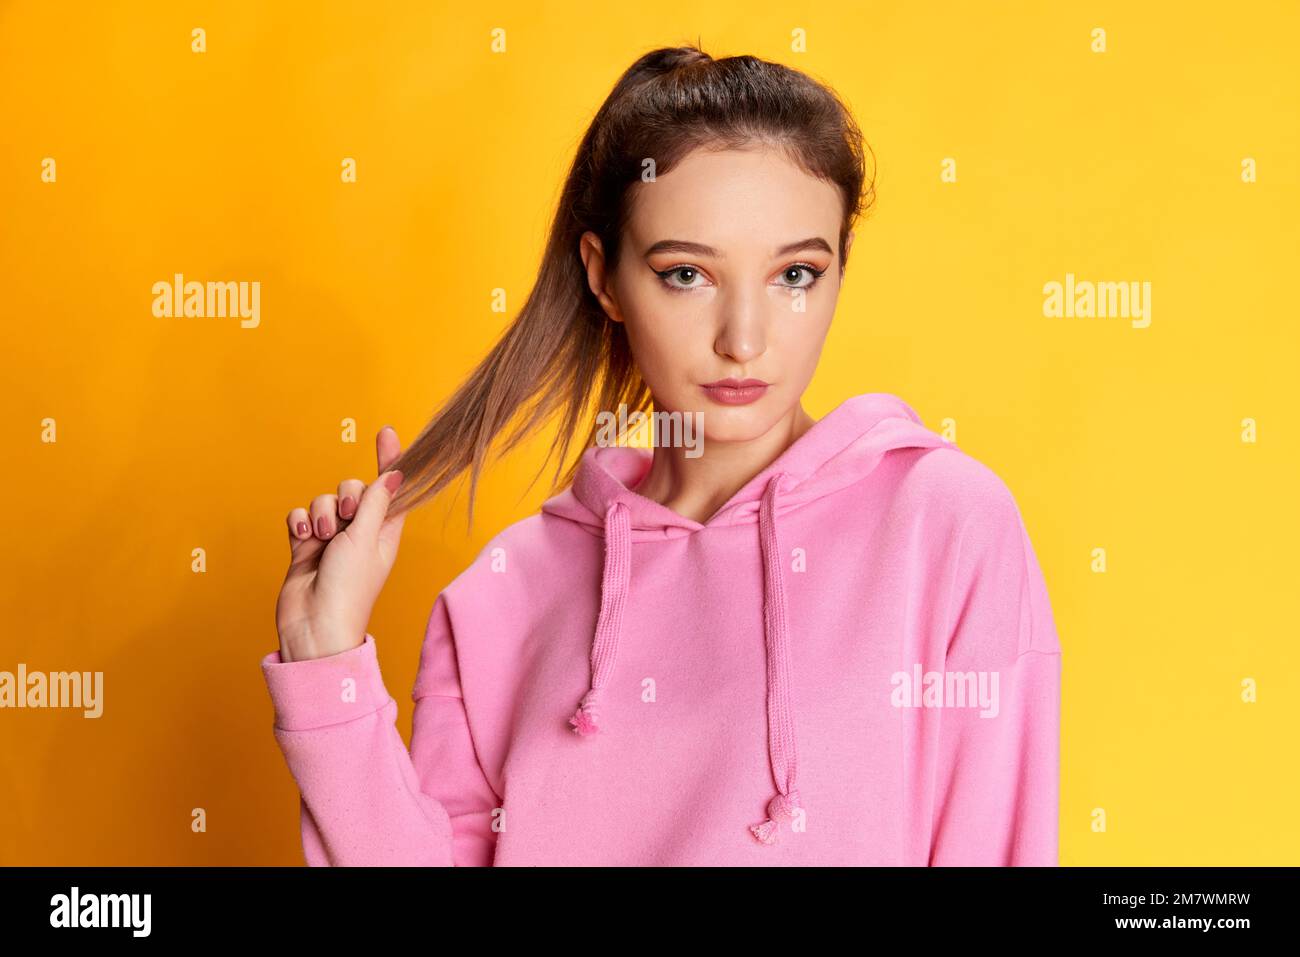 Portrait of young beautiful girl with ponytail posing in pink hoodie, looking at camera over yellow studio background. Concept of youth, emotions Stock Photo